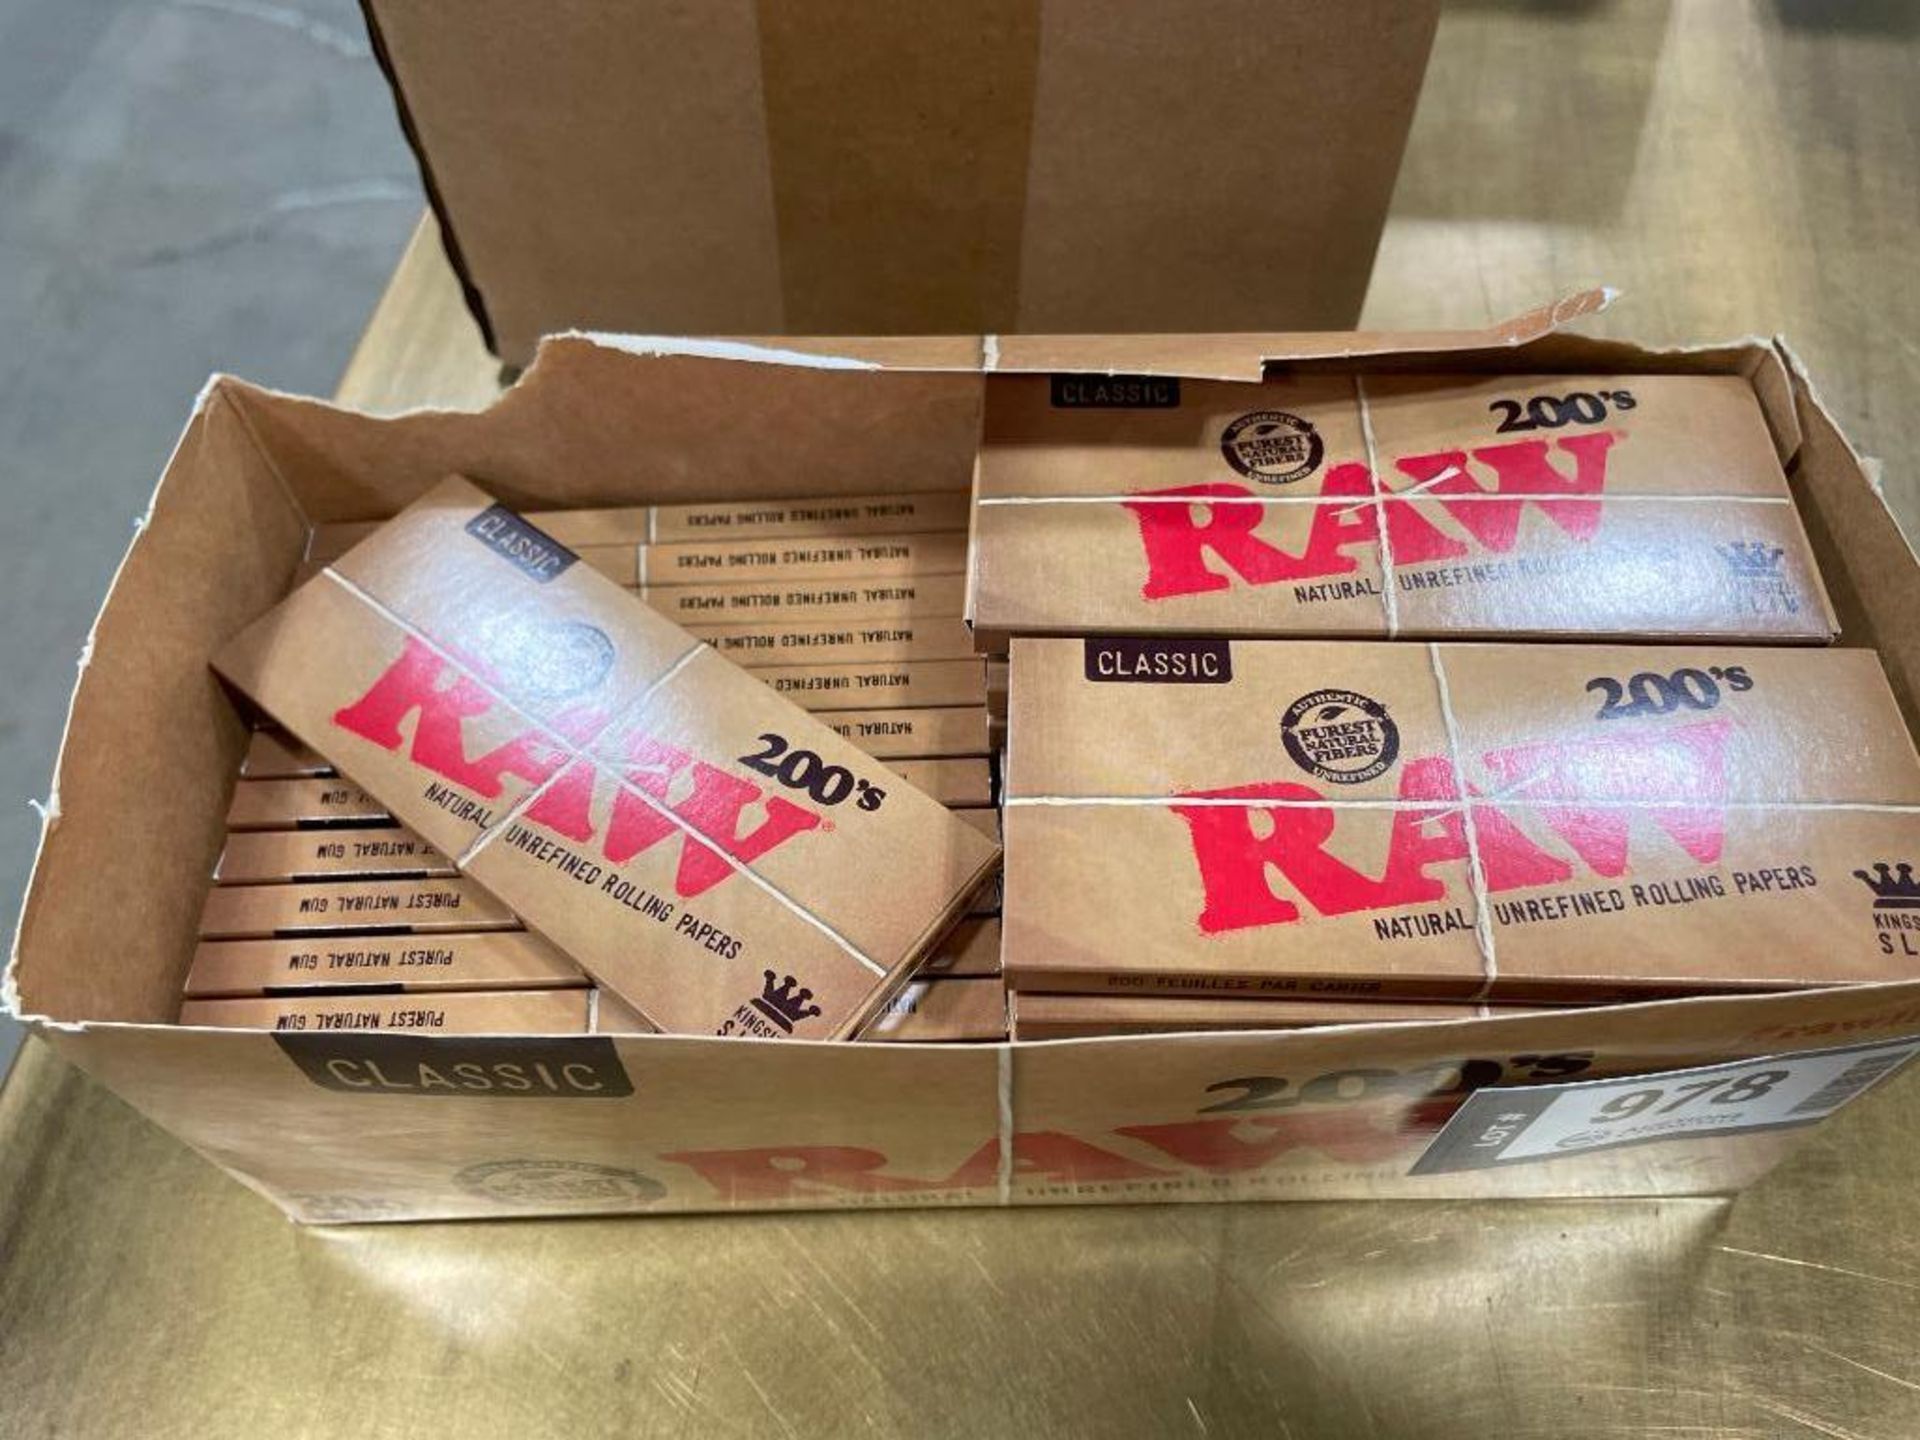 (30) PACKS OF RAW 200s NATURAL UNREFINED ROLLING PAPERS - Image 4 of 4